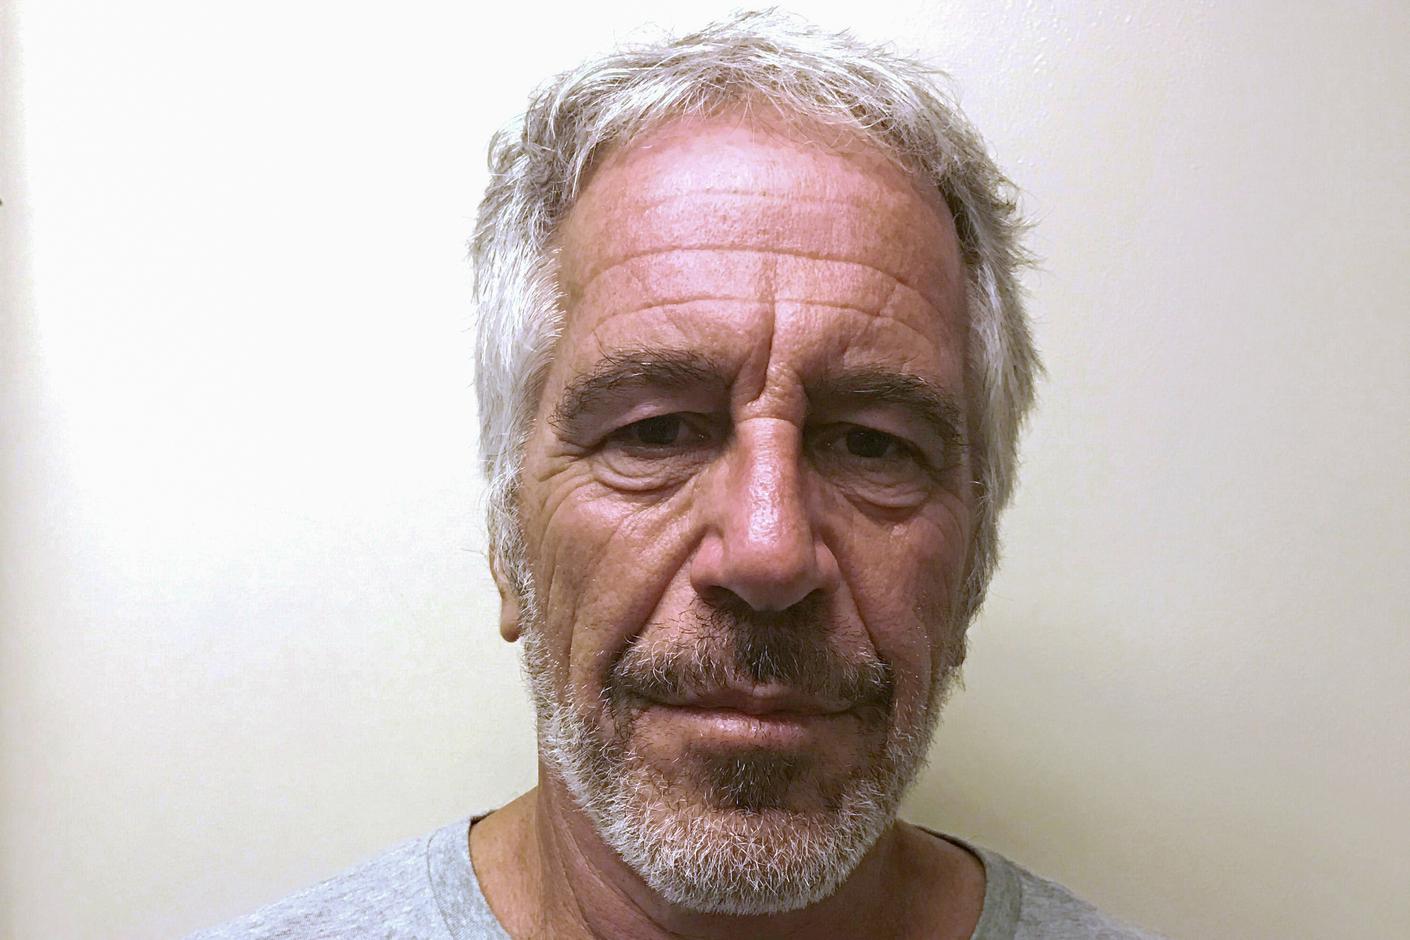 Disgraced money manager Jeffrey Epstein dead in apparent suicide